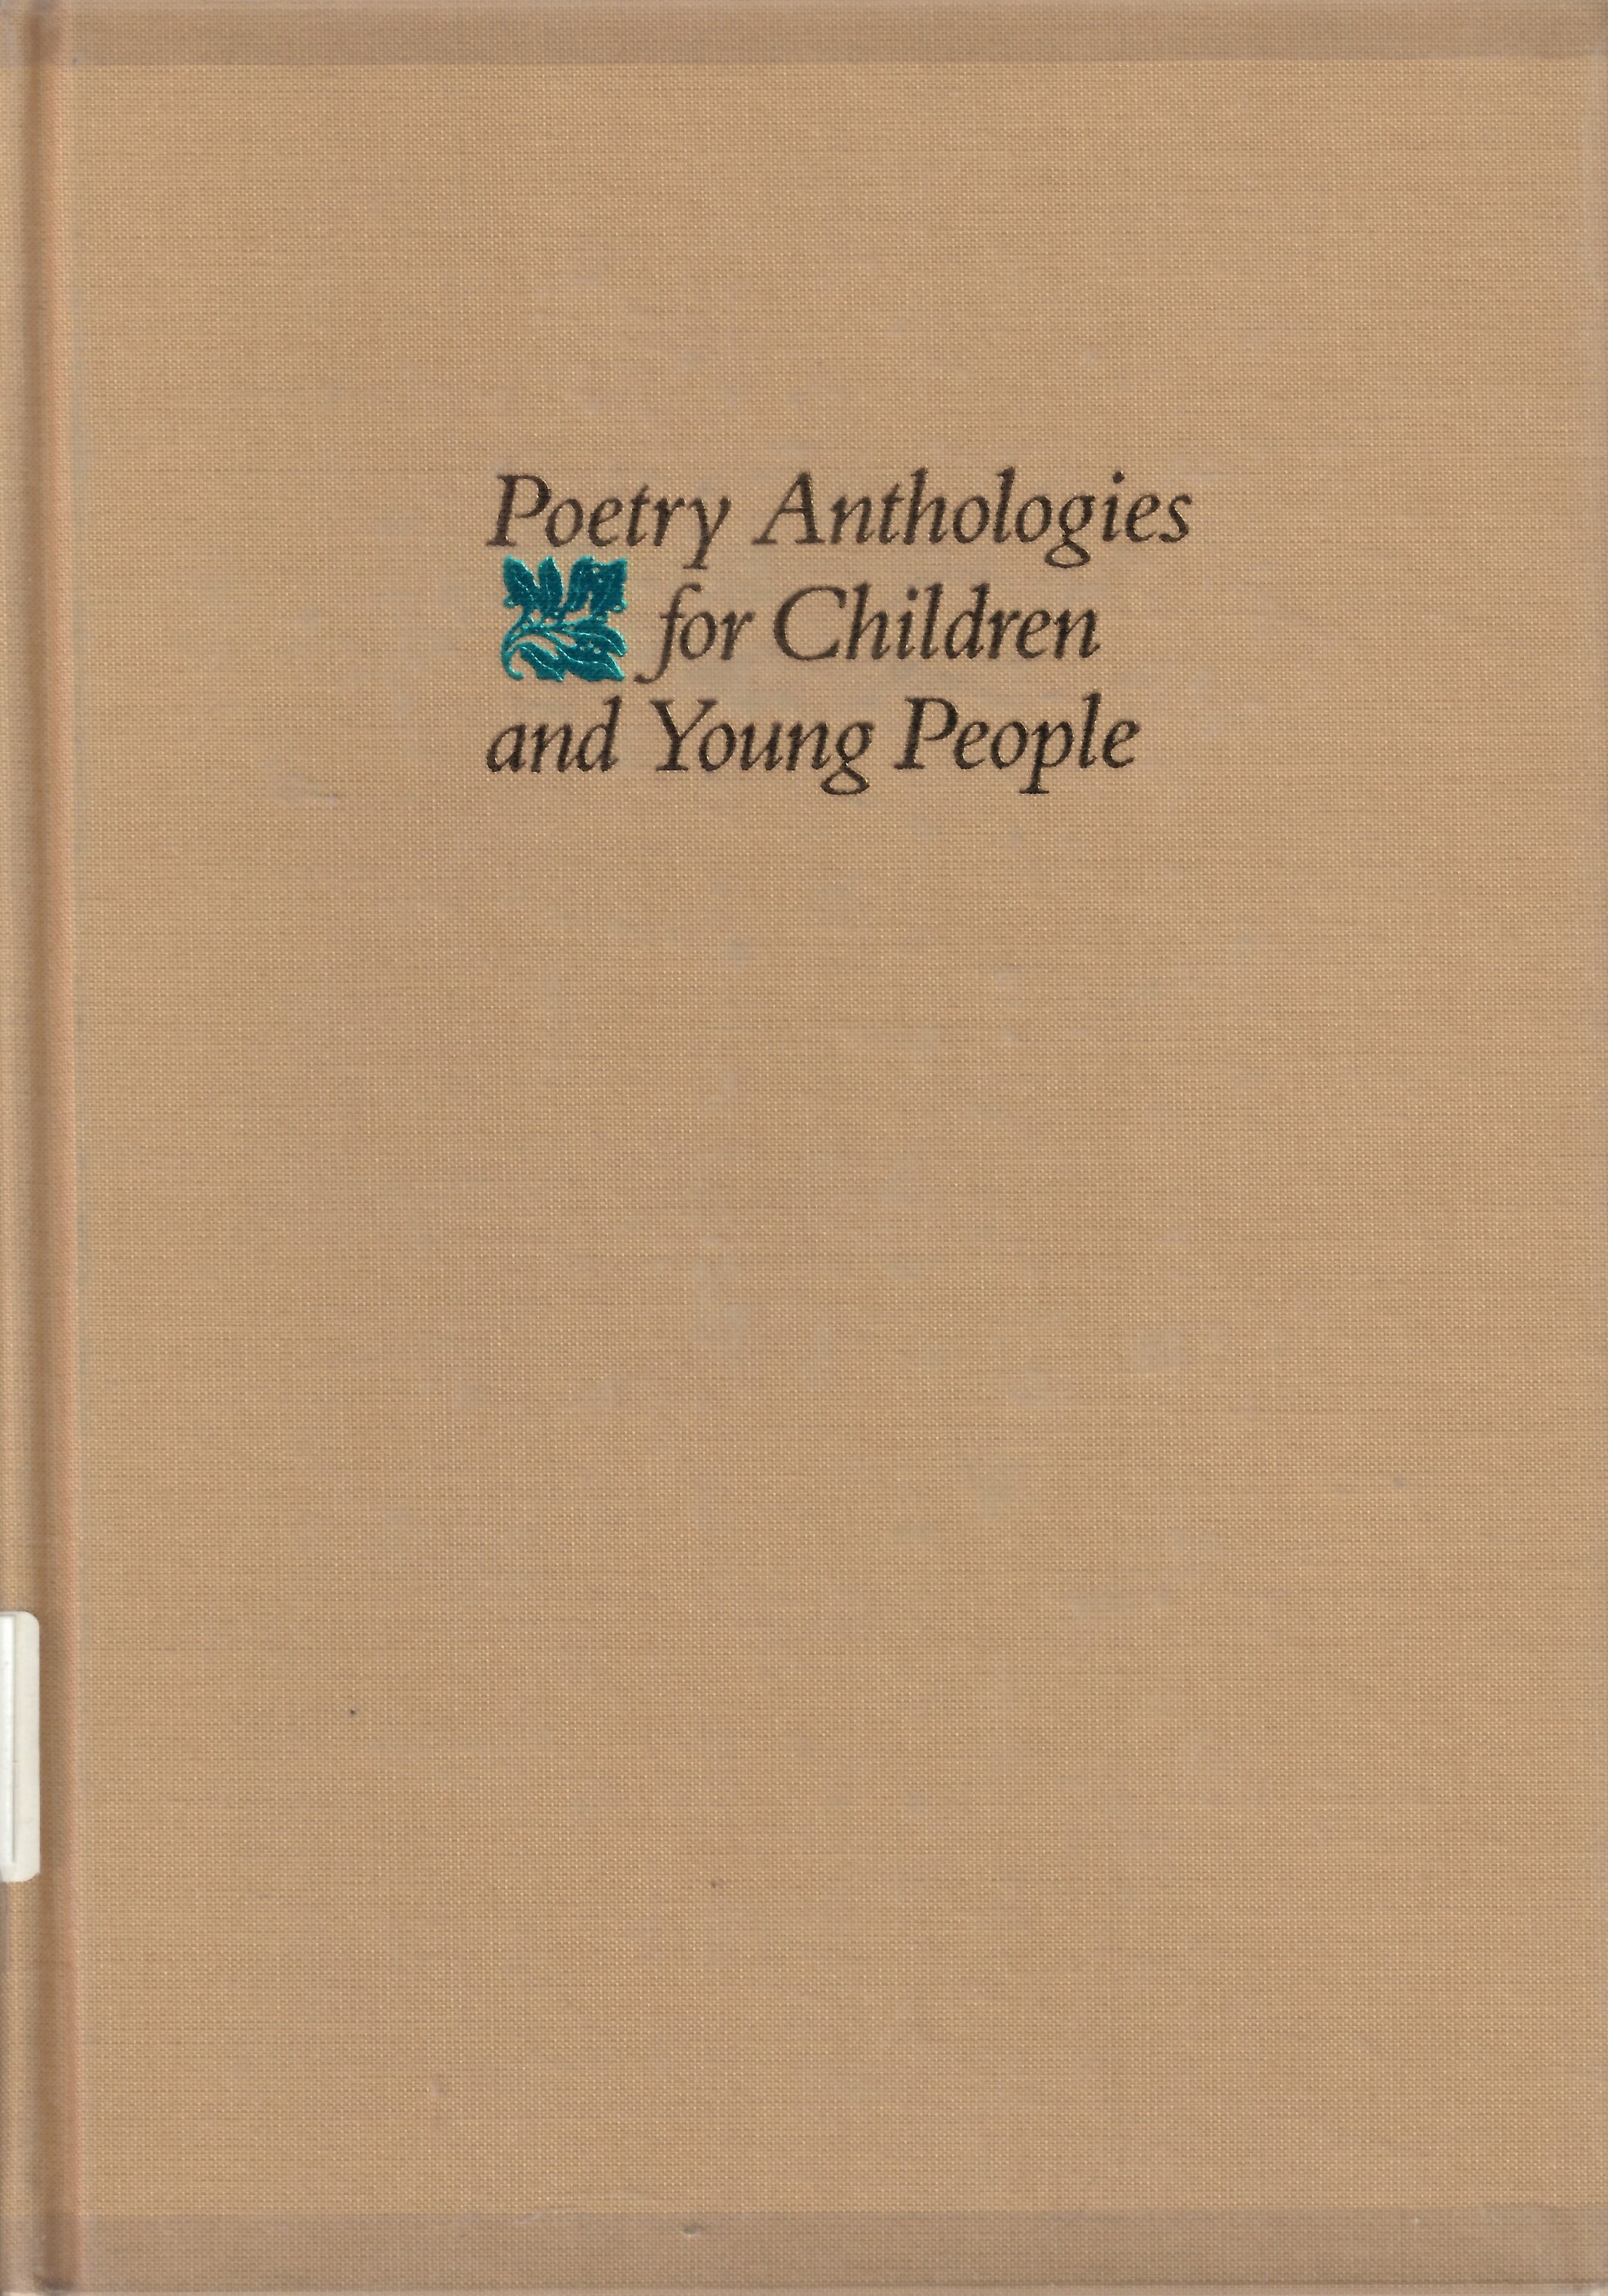 Poetry anthologies for children and young people